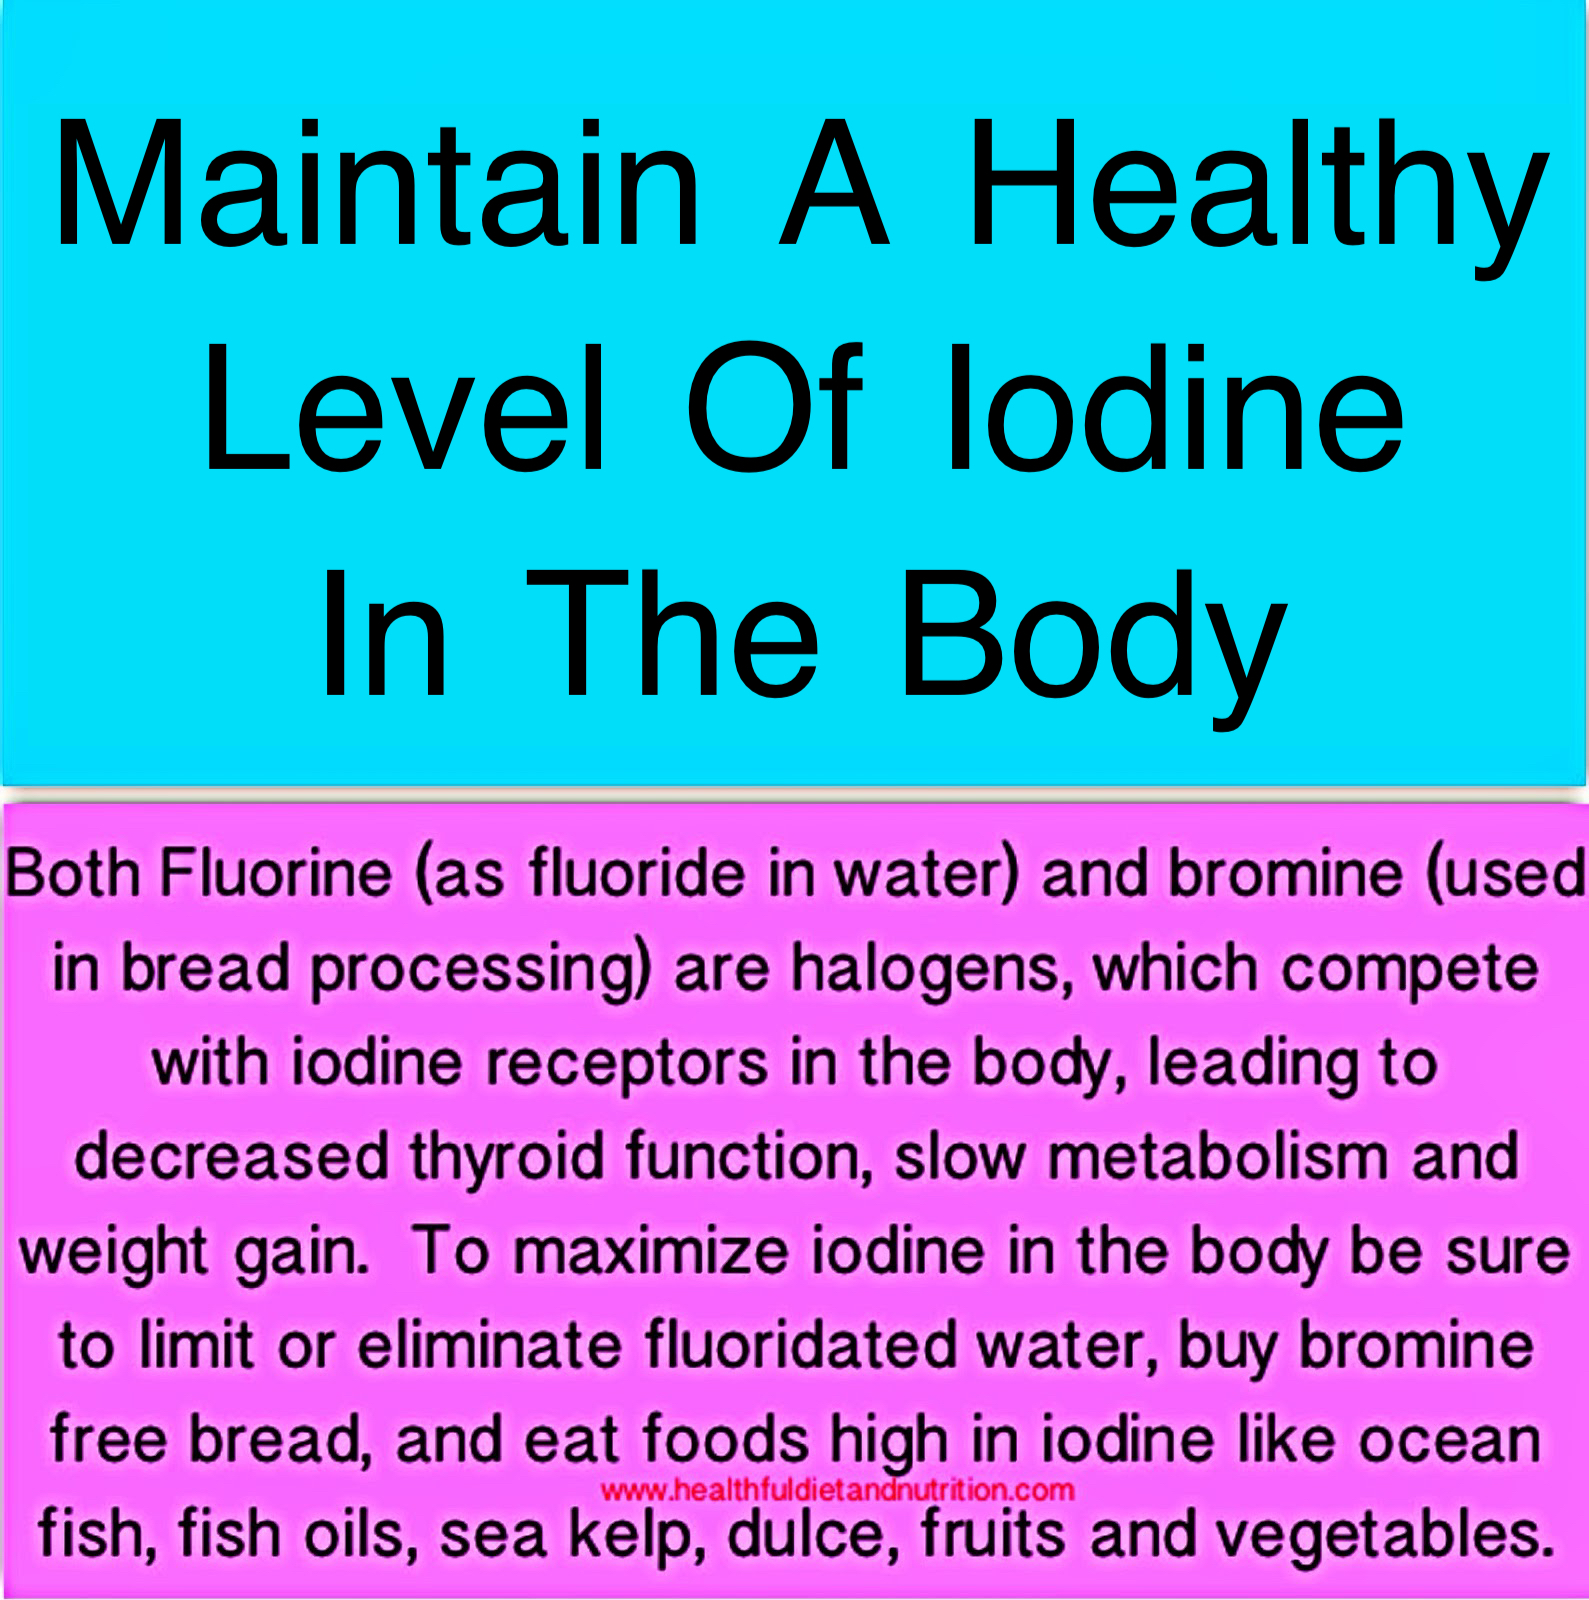 Maintain A Healthy Level Of Iodine In The Body